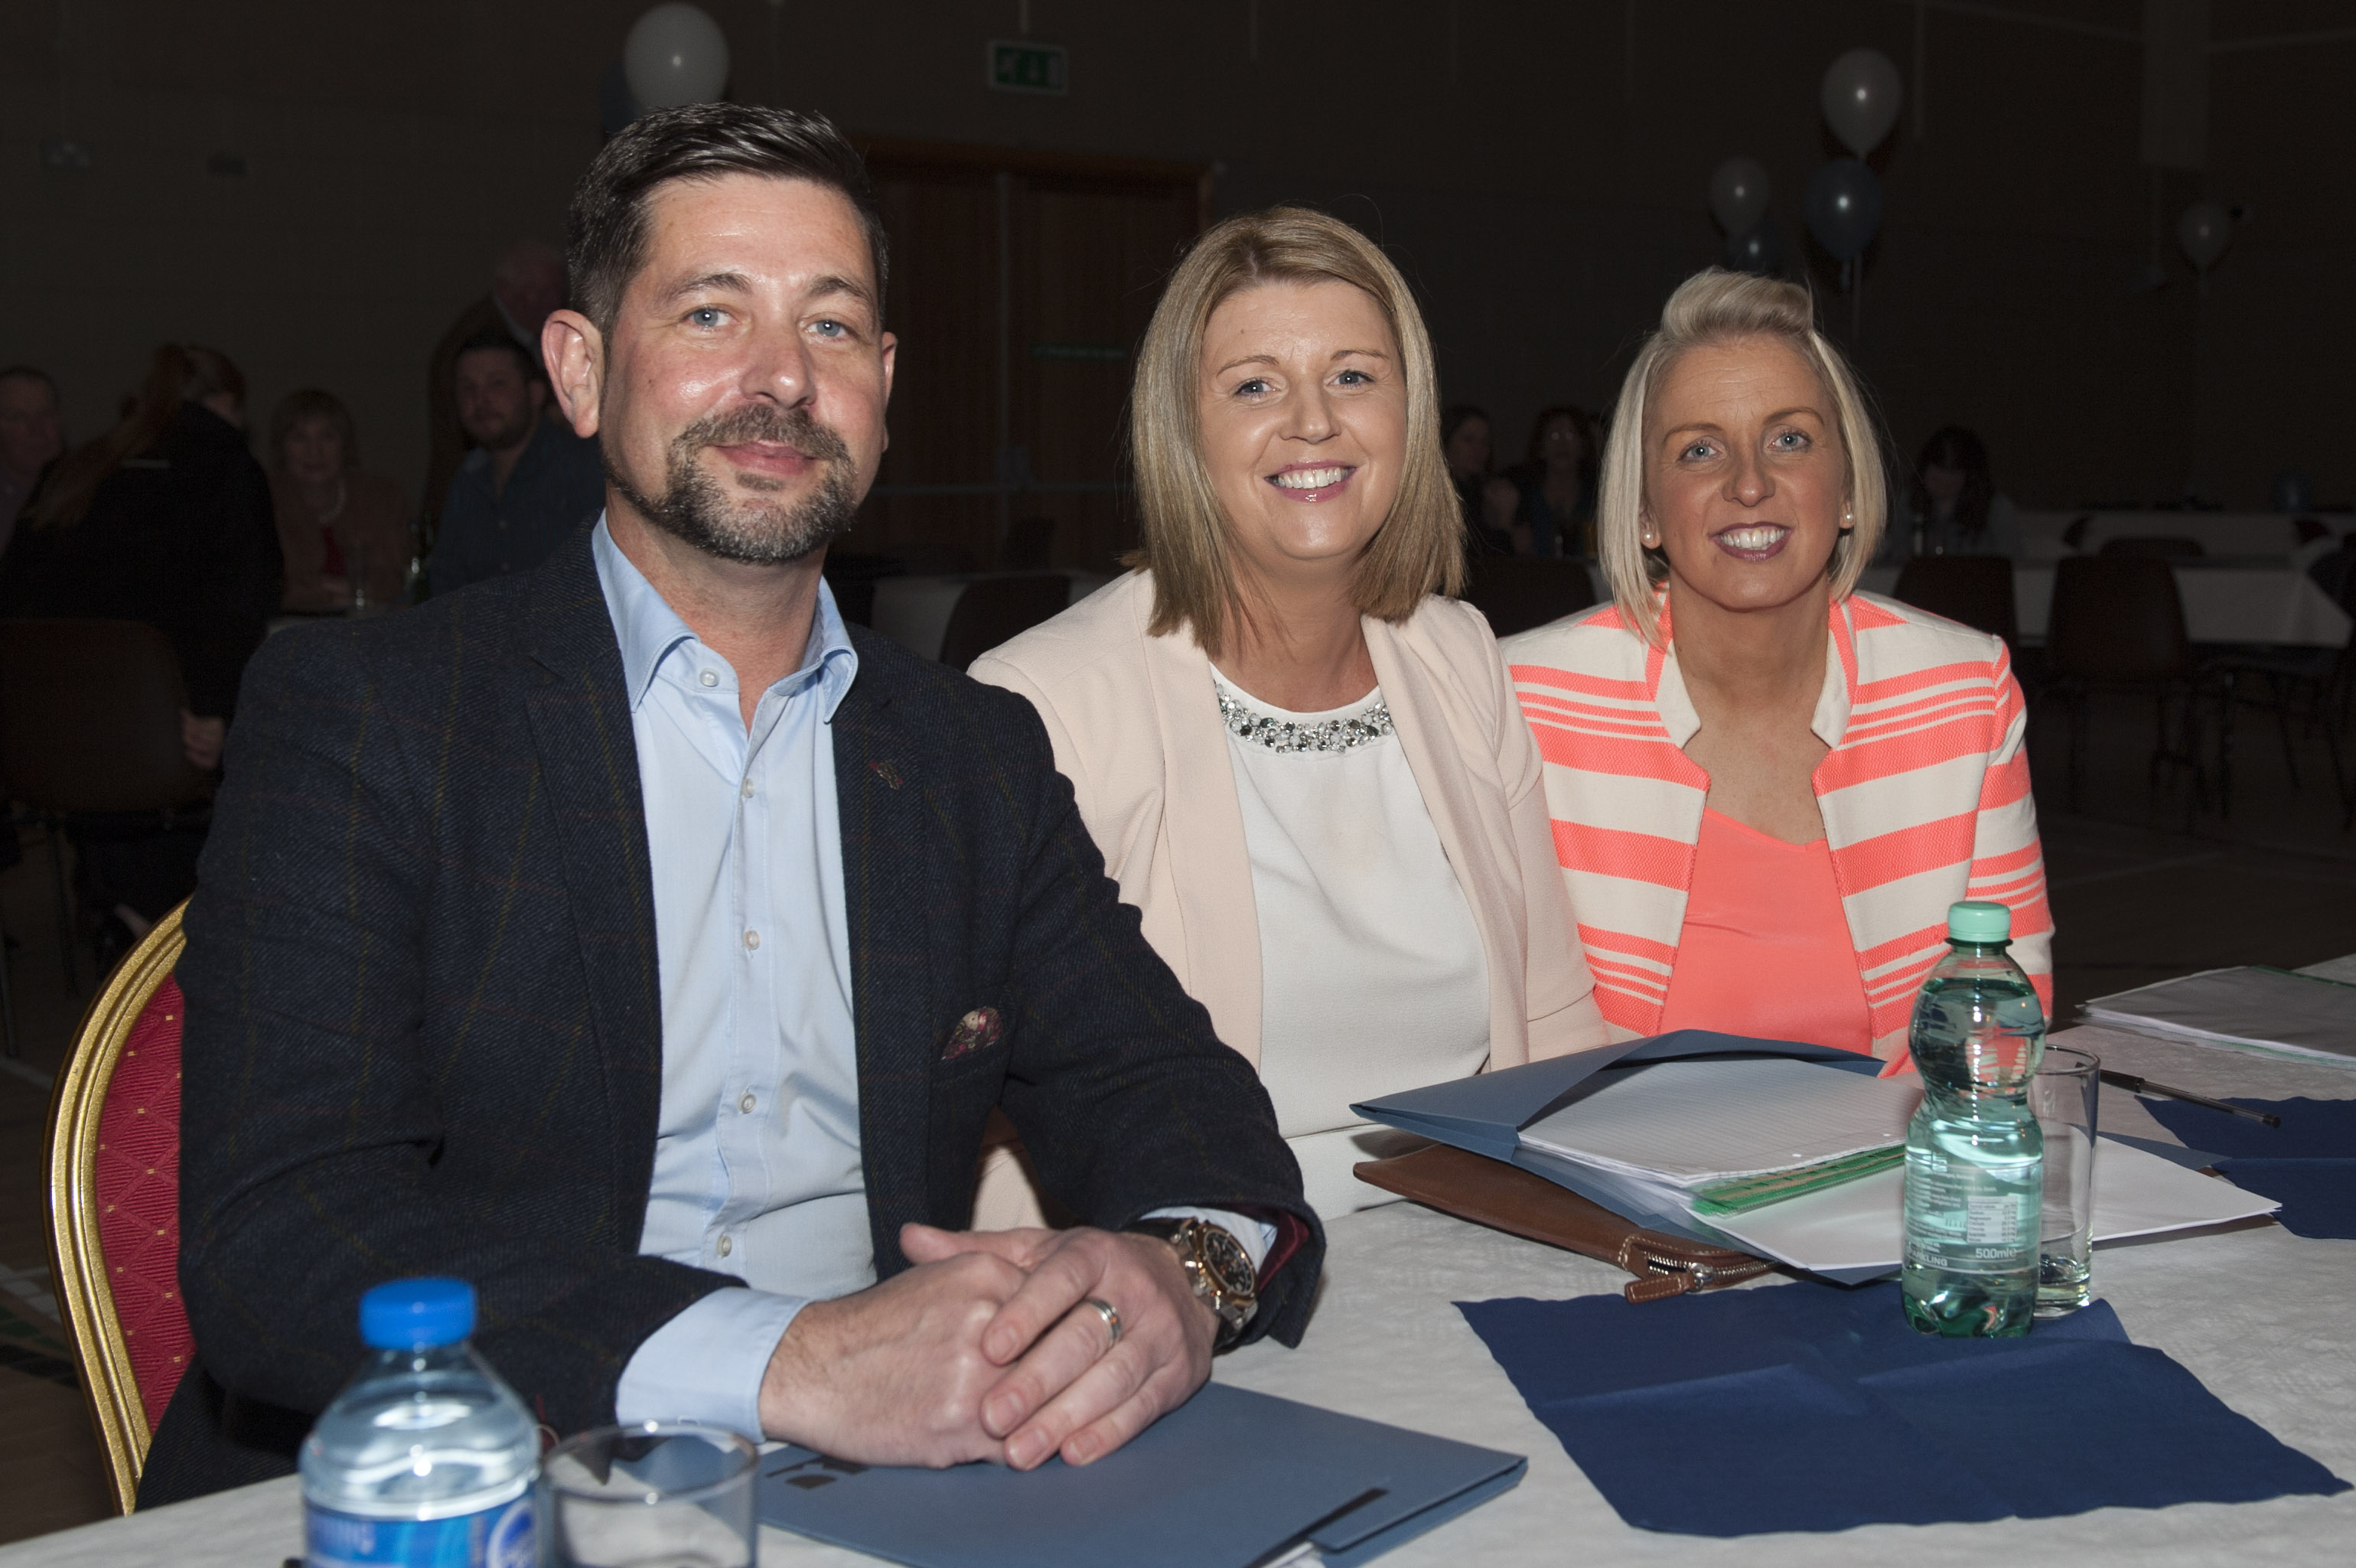 The judges at the Tydavnet Show Queen competition were (L-R) Barry McQuaid, Karen Callaghan and Eunice Lang. Â©Rory Geary/The Northern Standard